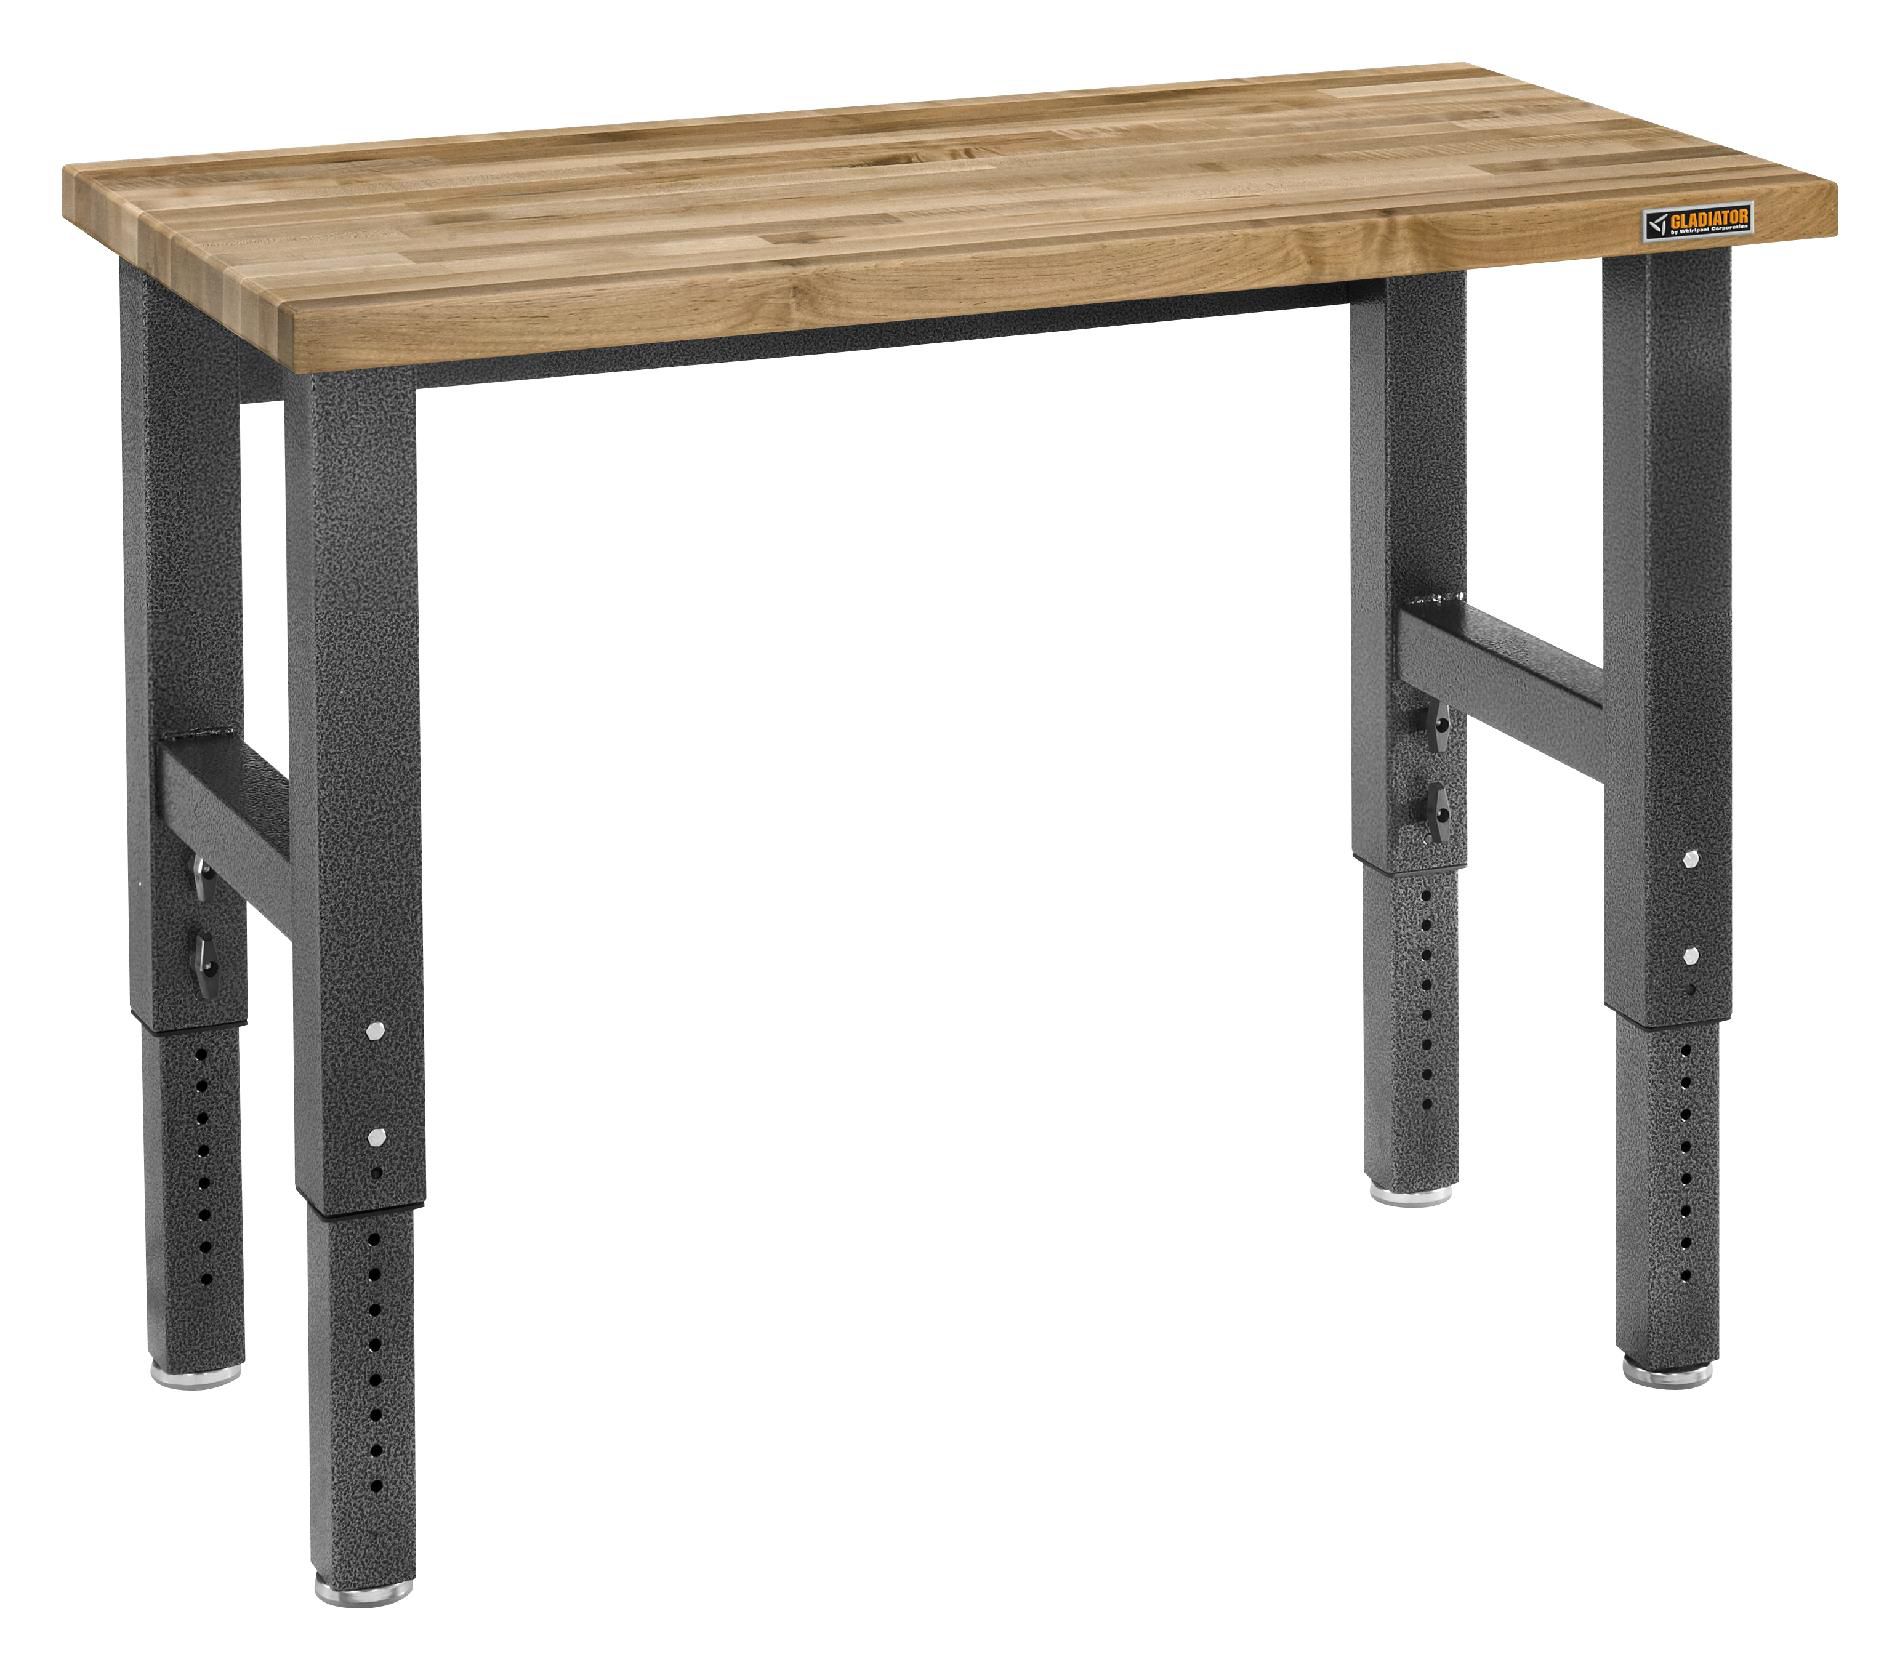 Gladiator Premier Series 42 in. H x 48 in. W x 25 in. D Maple Top Adjustable Height Workbench in Hammered Granite